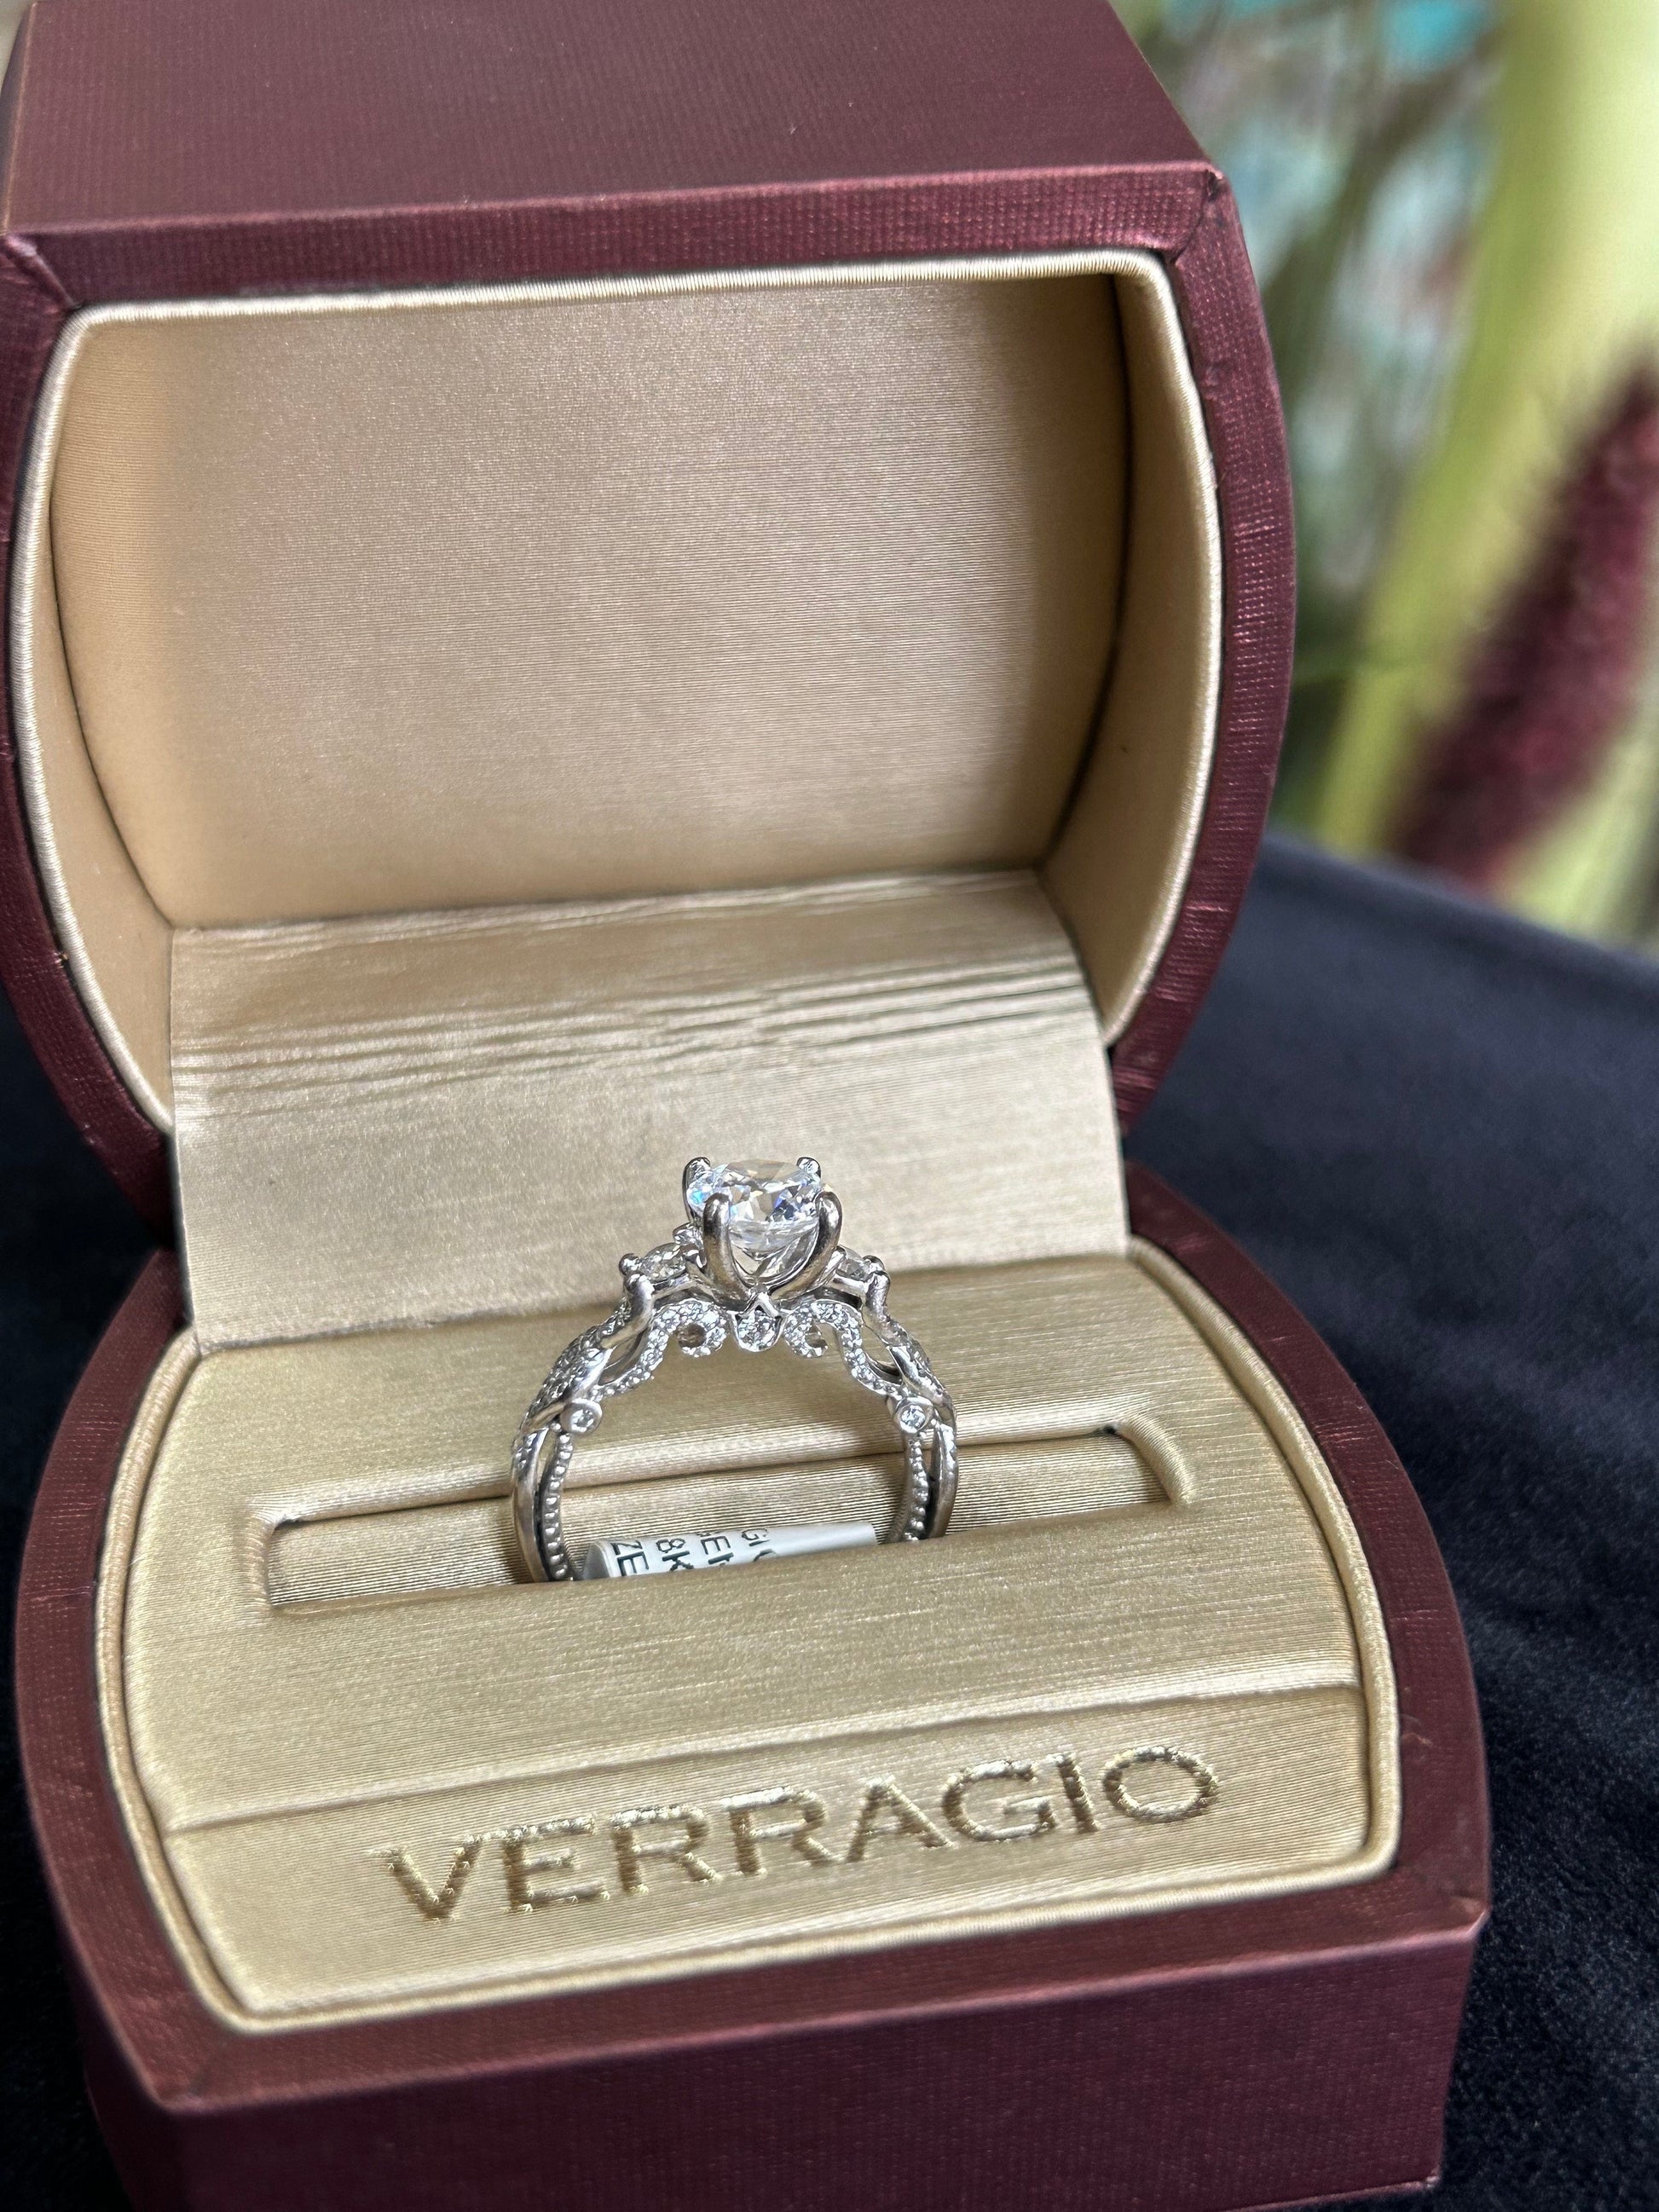 Verragio 18kt Engagement Ring White Gold Synthetic Center Stone